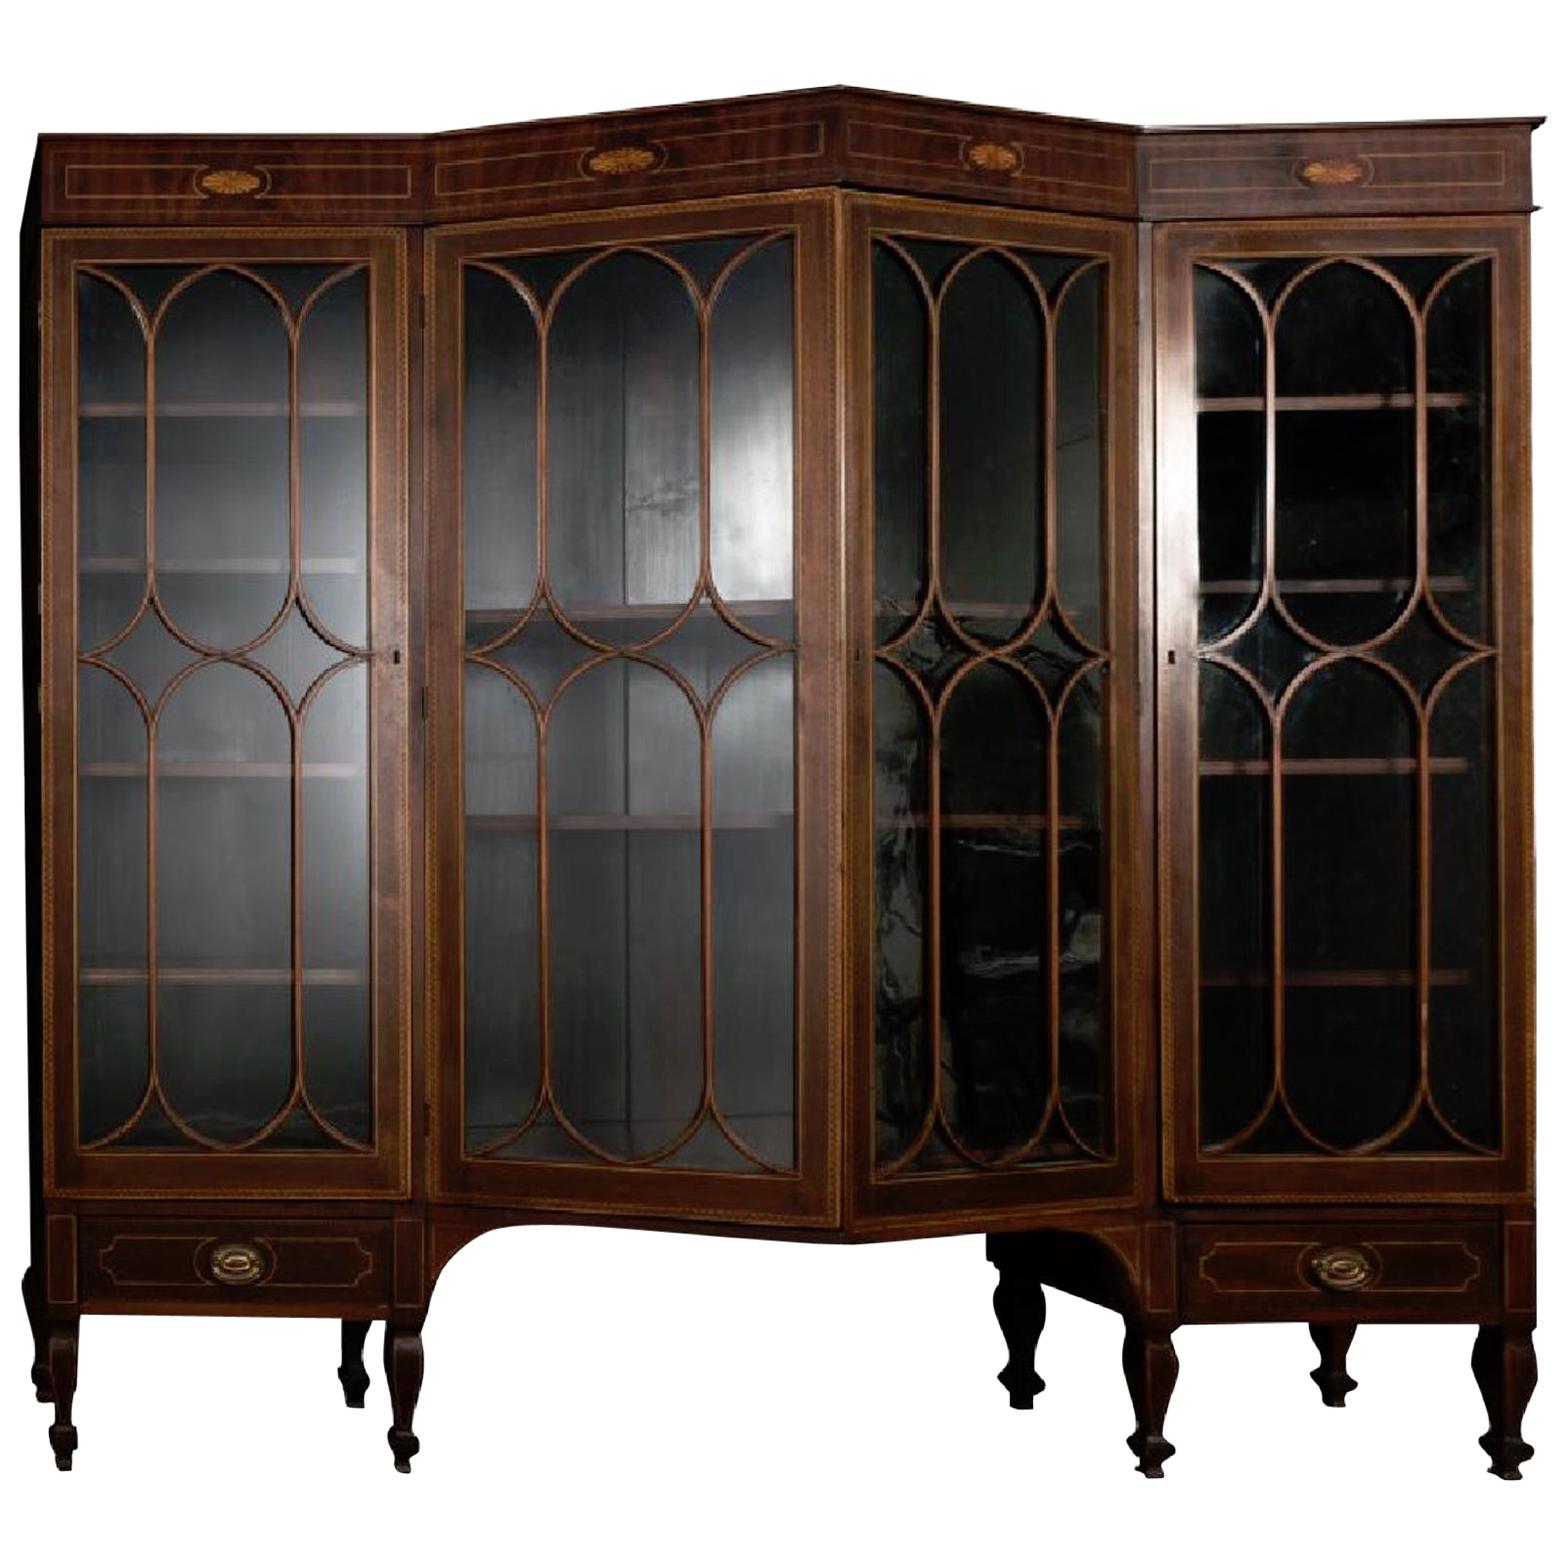 Georgian Style Inlaid Mahogany Architectural Bookcase For Sale